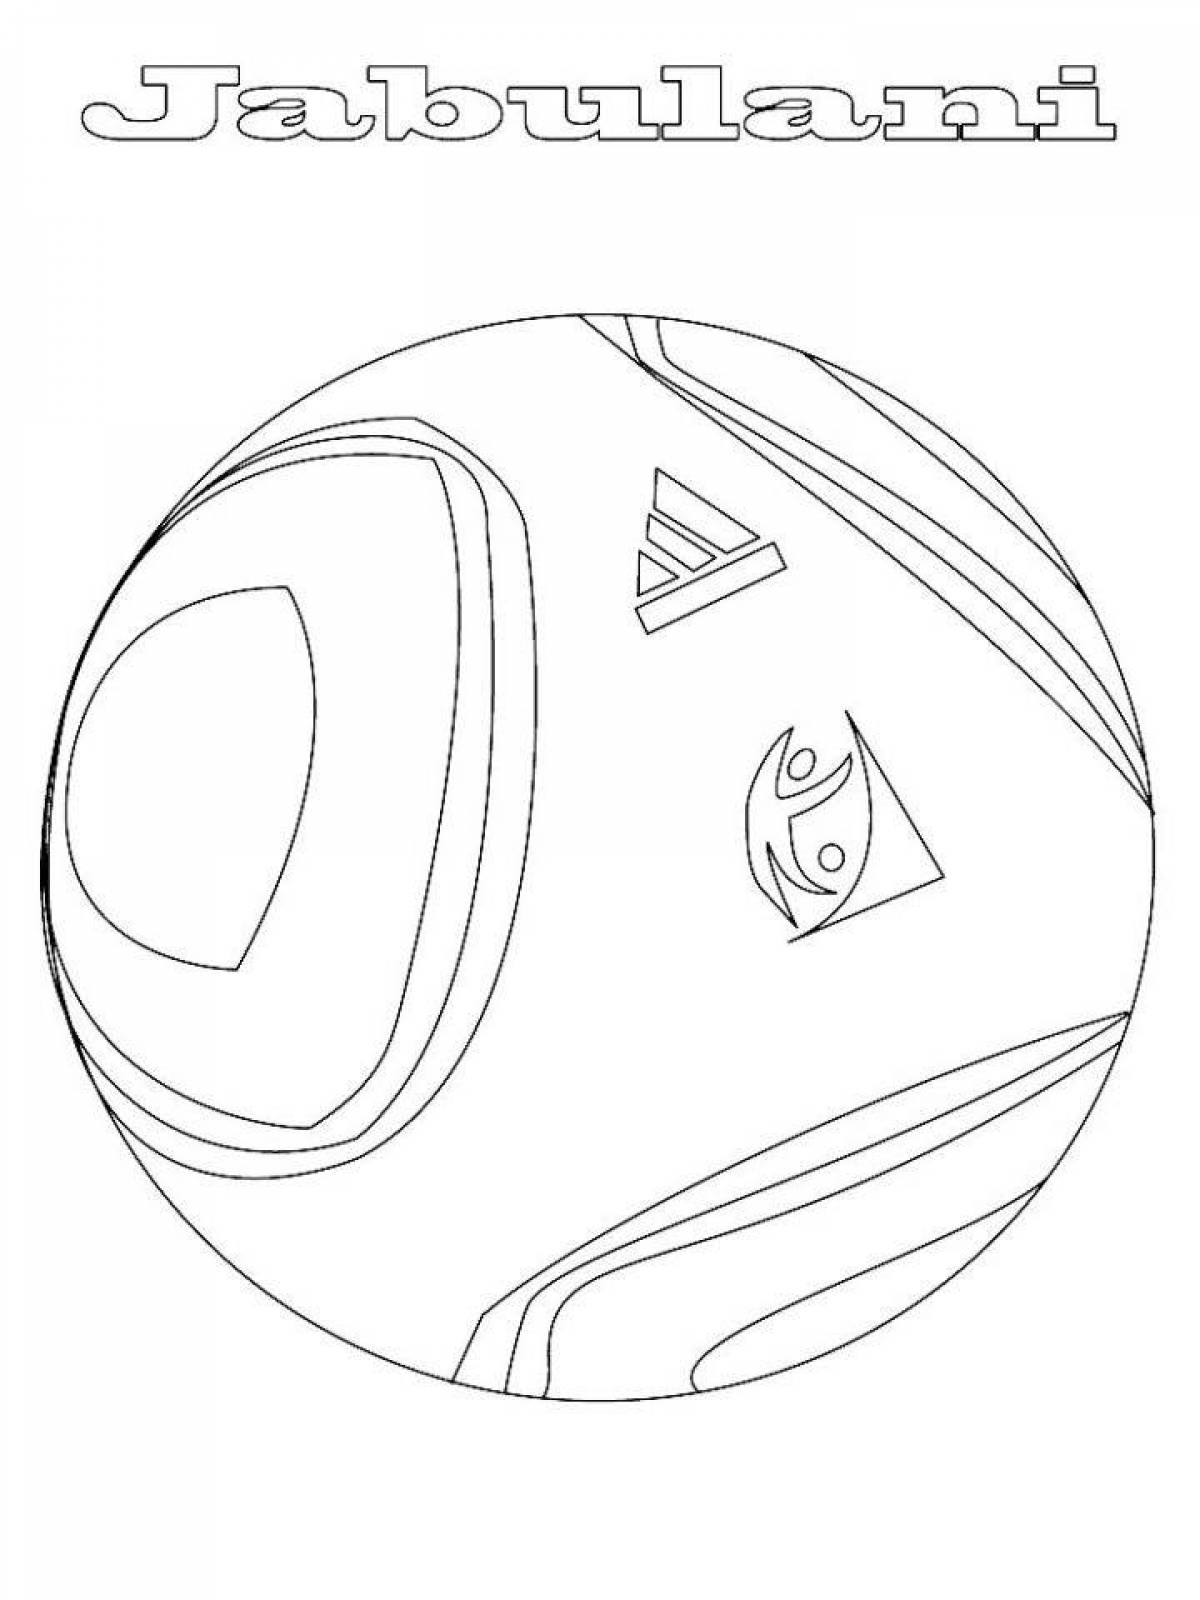 Majestic soccer ball coloring page